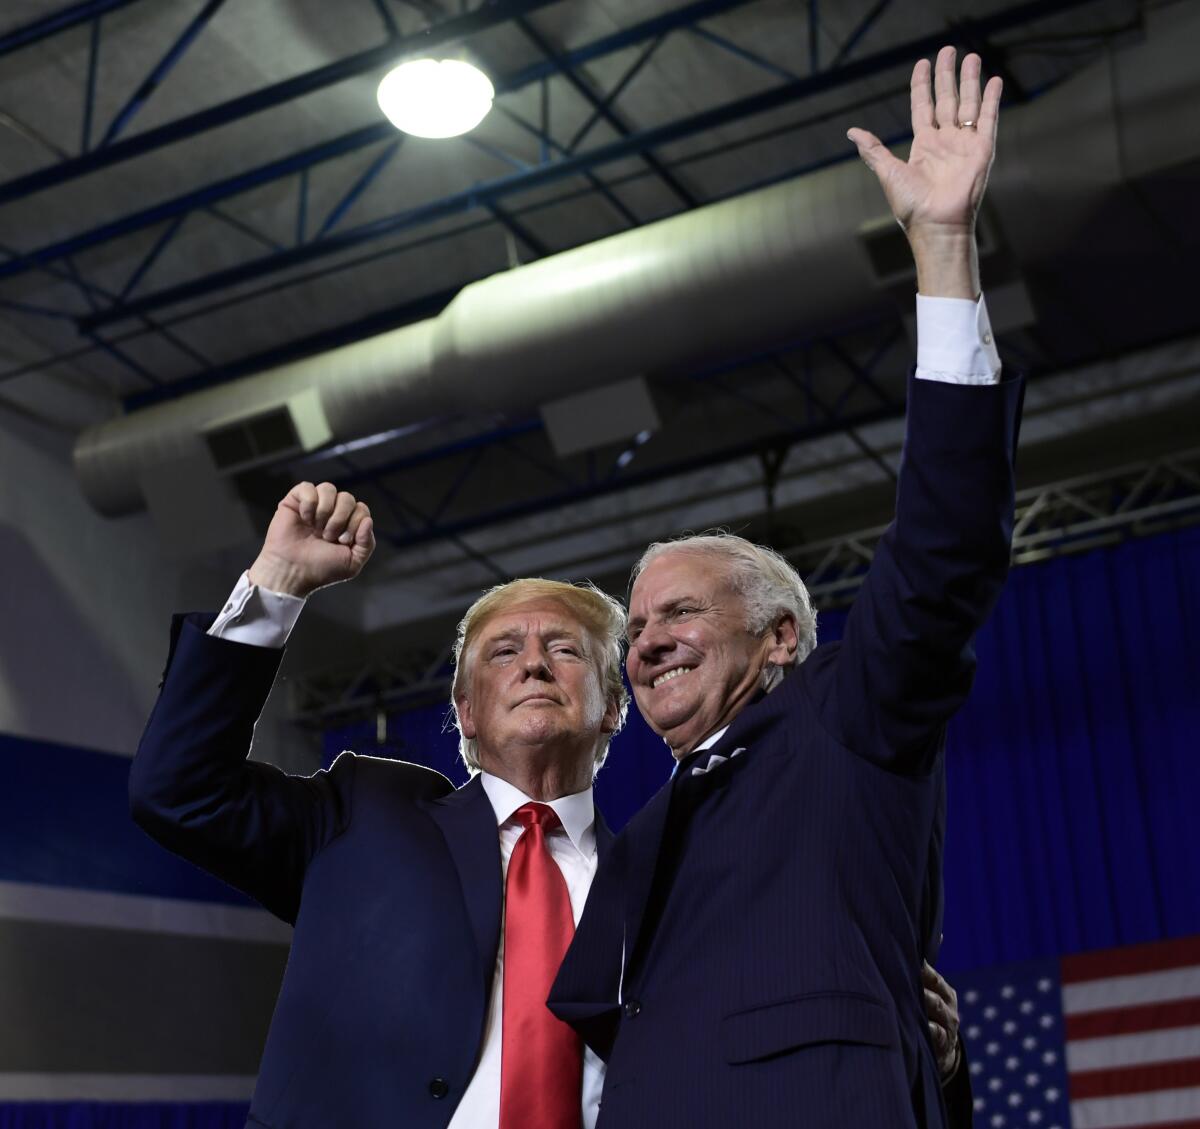 FILE - In this Monday, June 25, 2018 file photo, President Donald Trump speaks during a rally at Airport High School in West Columbia, S.C. for Republican Gov. Henry McMaster, right. Former President Donald Trump on Friday, March 5, 2021 endorsed South Carolina Gov. Henry McMaster's bid for a second full term in 2022, continuing their yearslong alliance in a move to strengthen ties with the early-voting state that Trump won twice. (AP Photo/Susan Walsh, File)